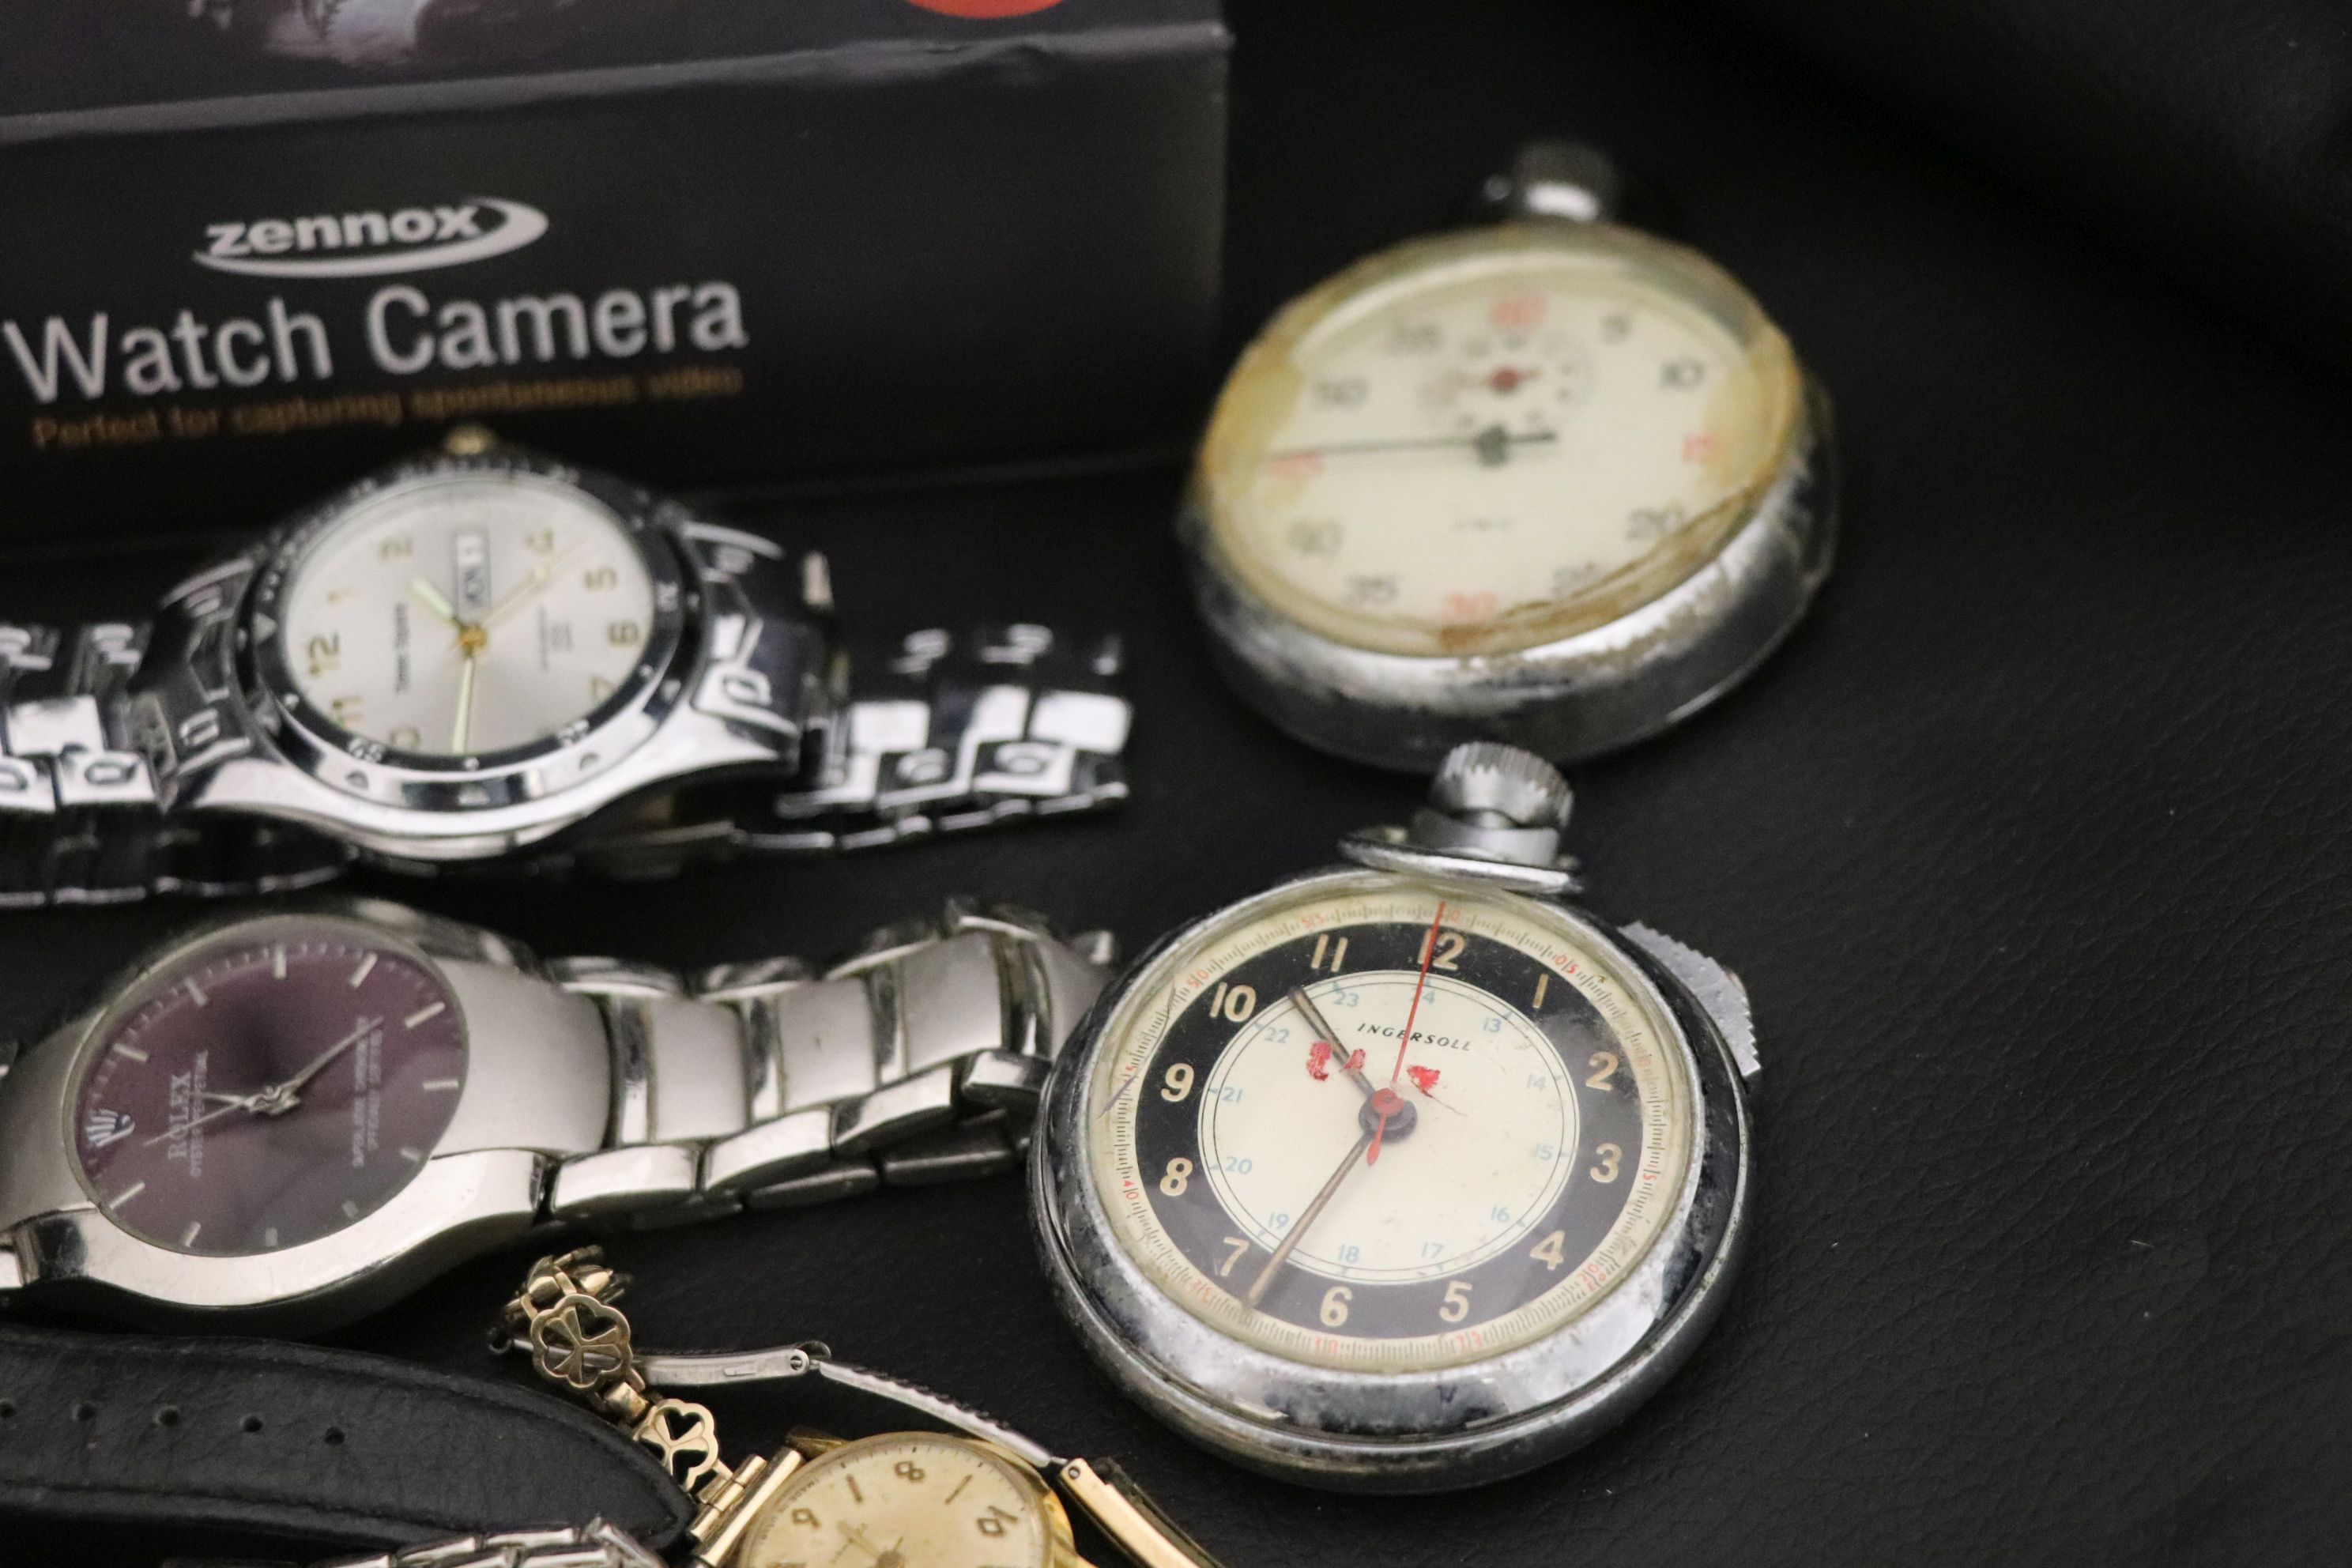 A collection of wristwatches and chrome plated pocket watches to include Ingersoll, Zennox watch - Image 3 of 4